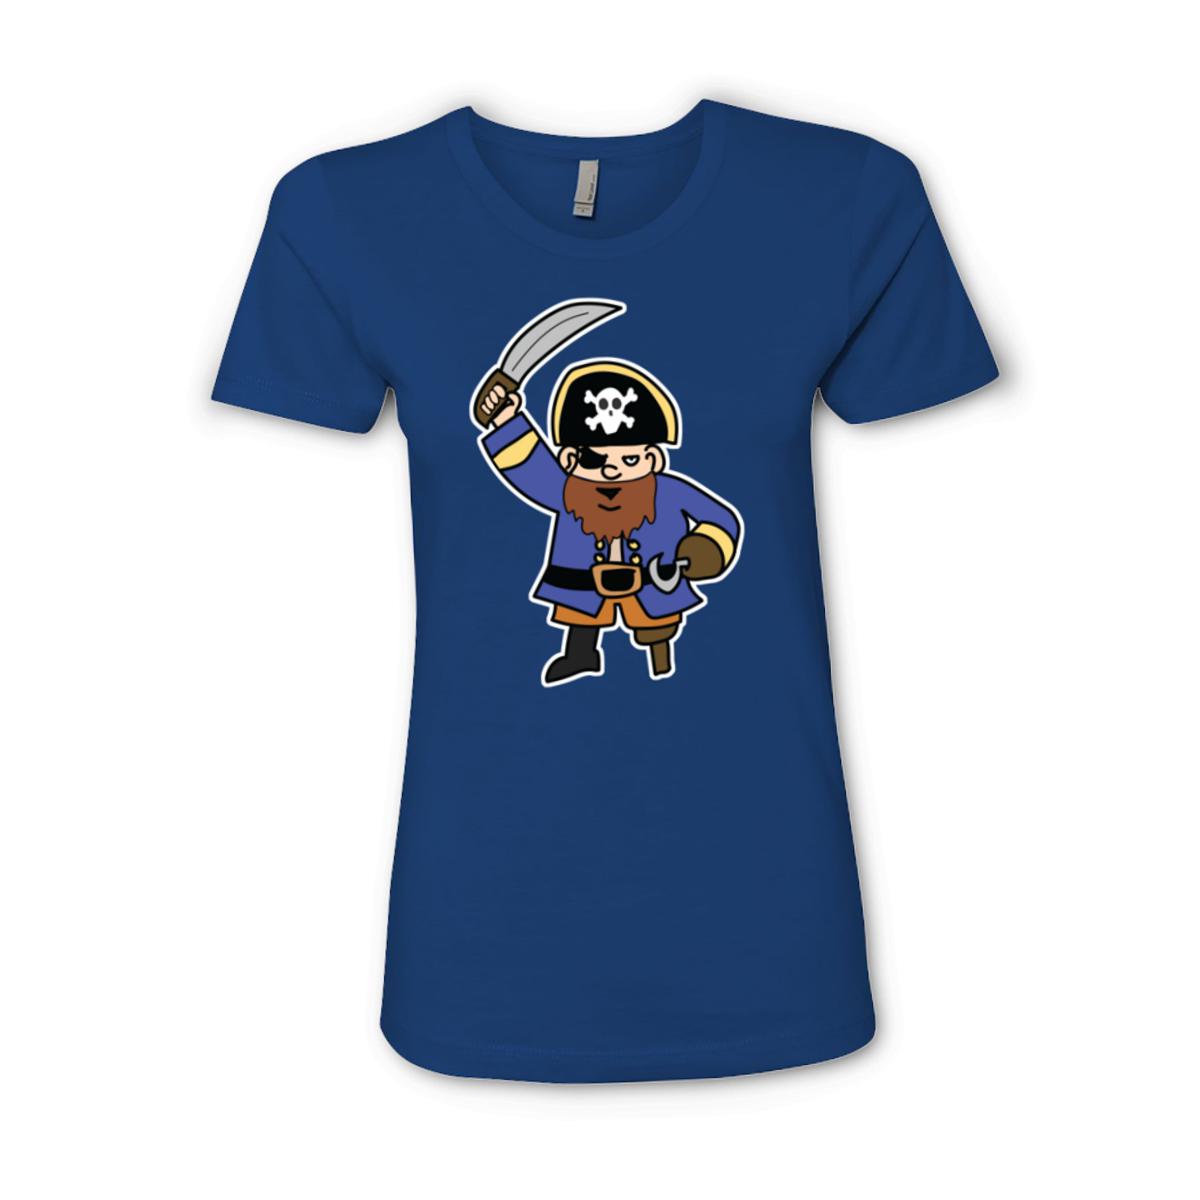 Pirate Ladies' Boyfriend Tee Double Extra Large royal-blue